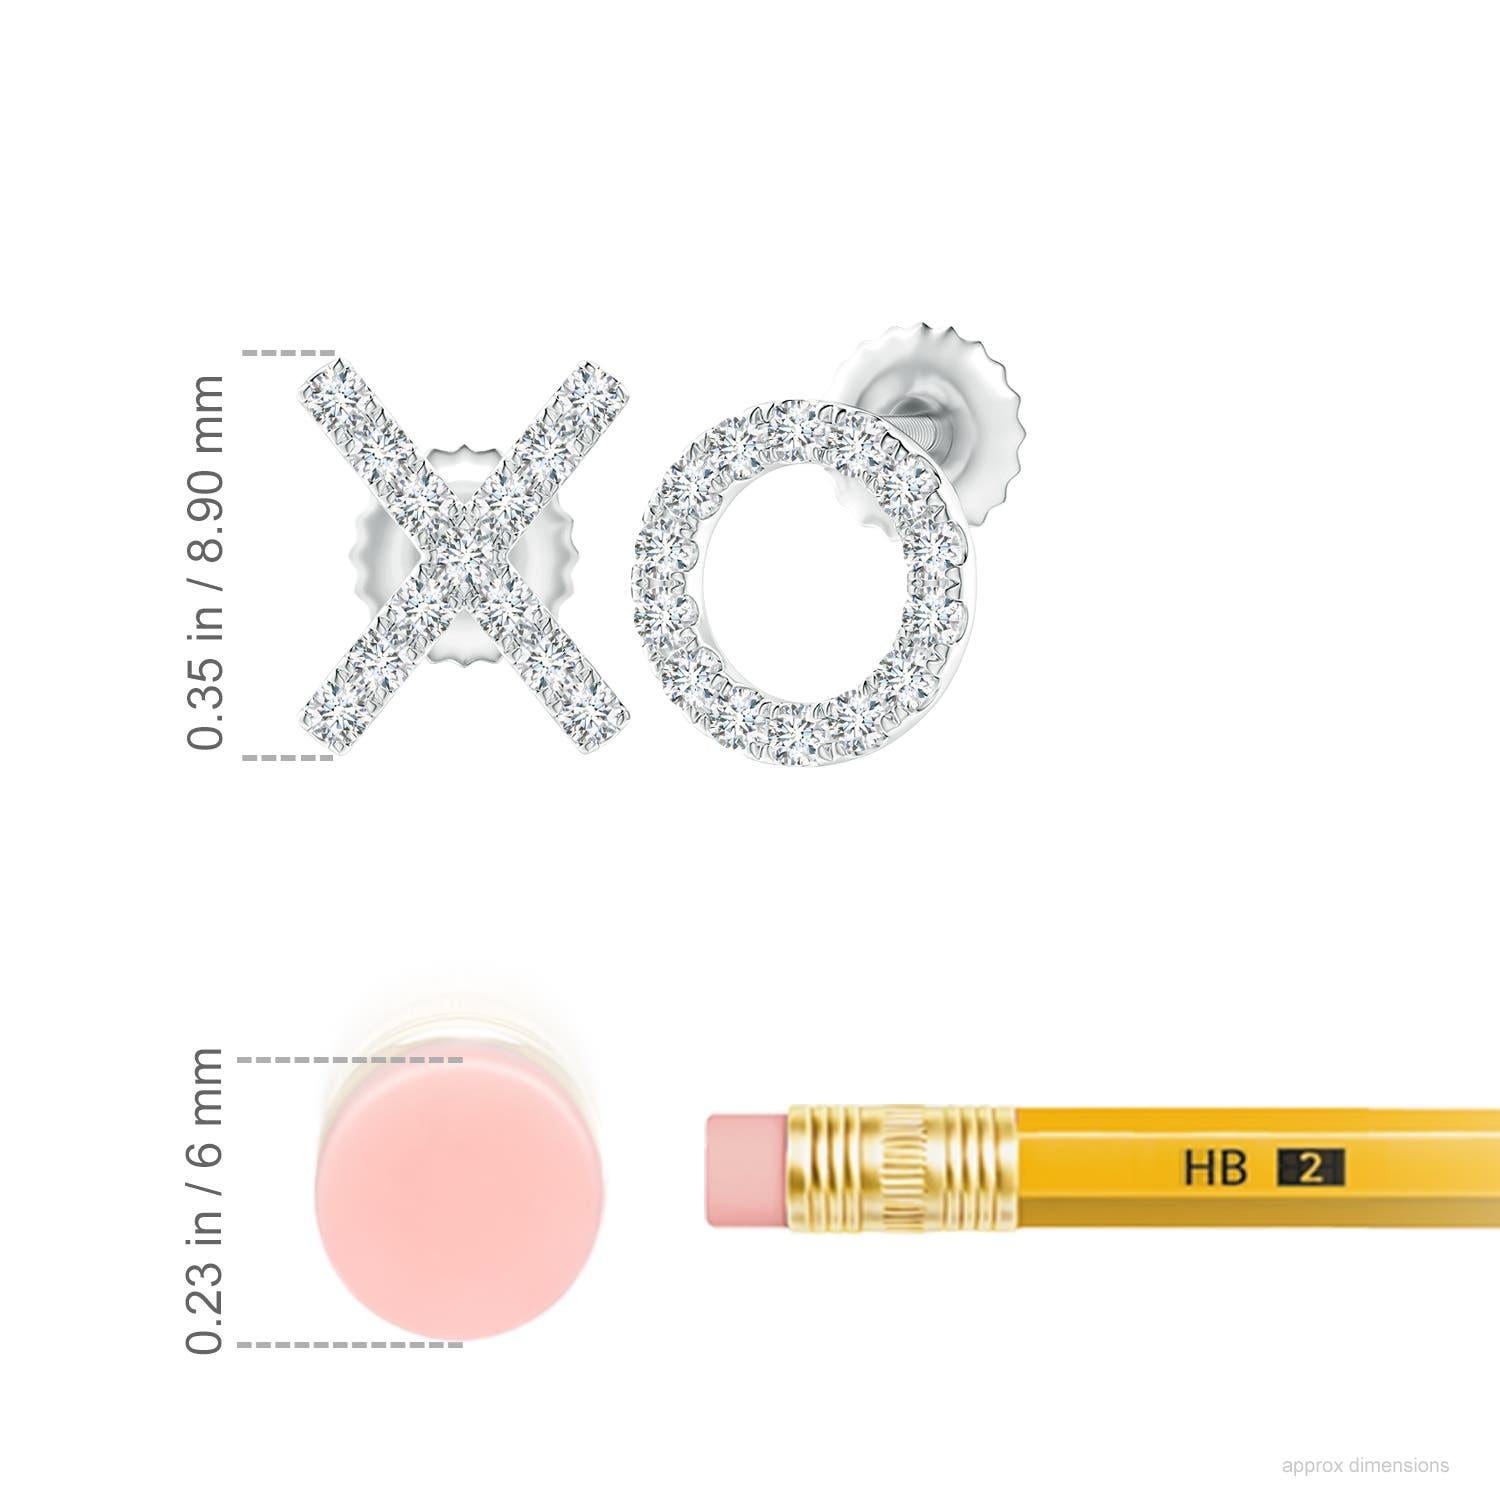 The XO stud earrings designed in platinum are simply fascinating. Sparkling round diamonds in a U pava setting brilliantly embellish the XO pattern, adding a dazzling touch to these adorable stud earrings.
Diamond is the Birthstone for April and